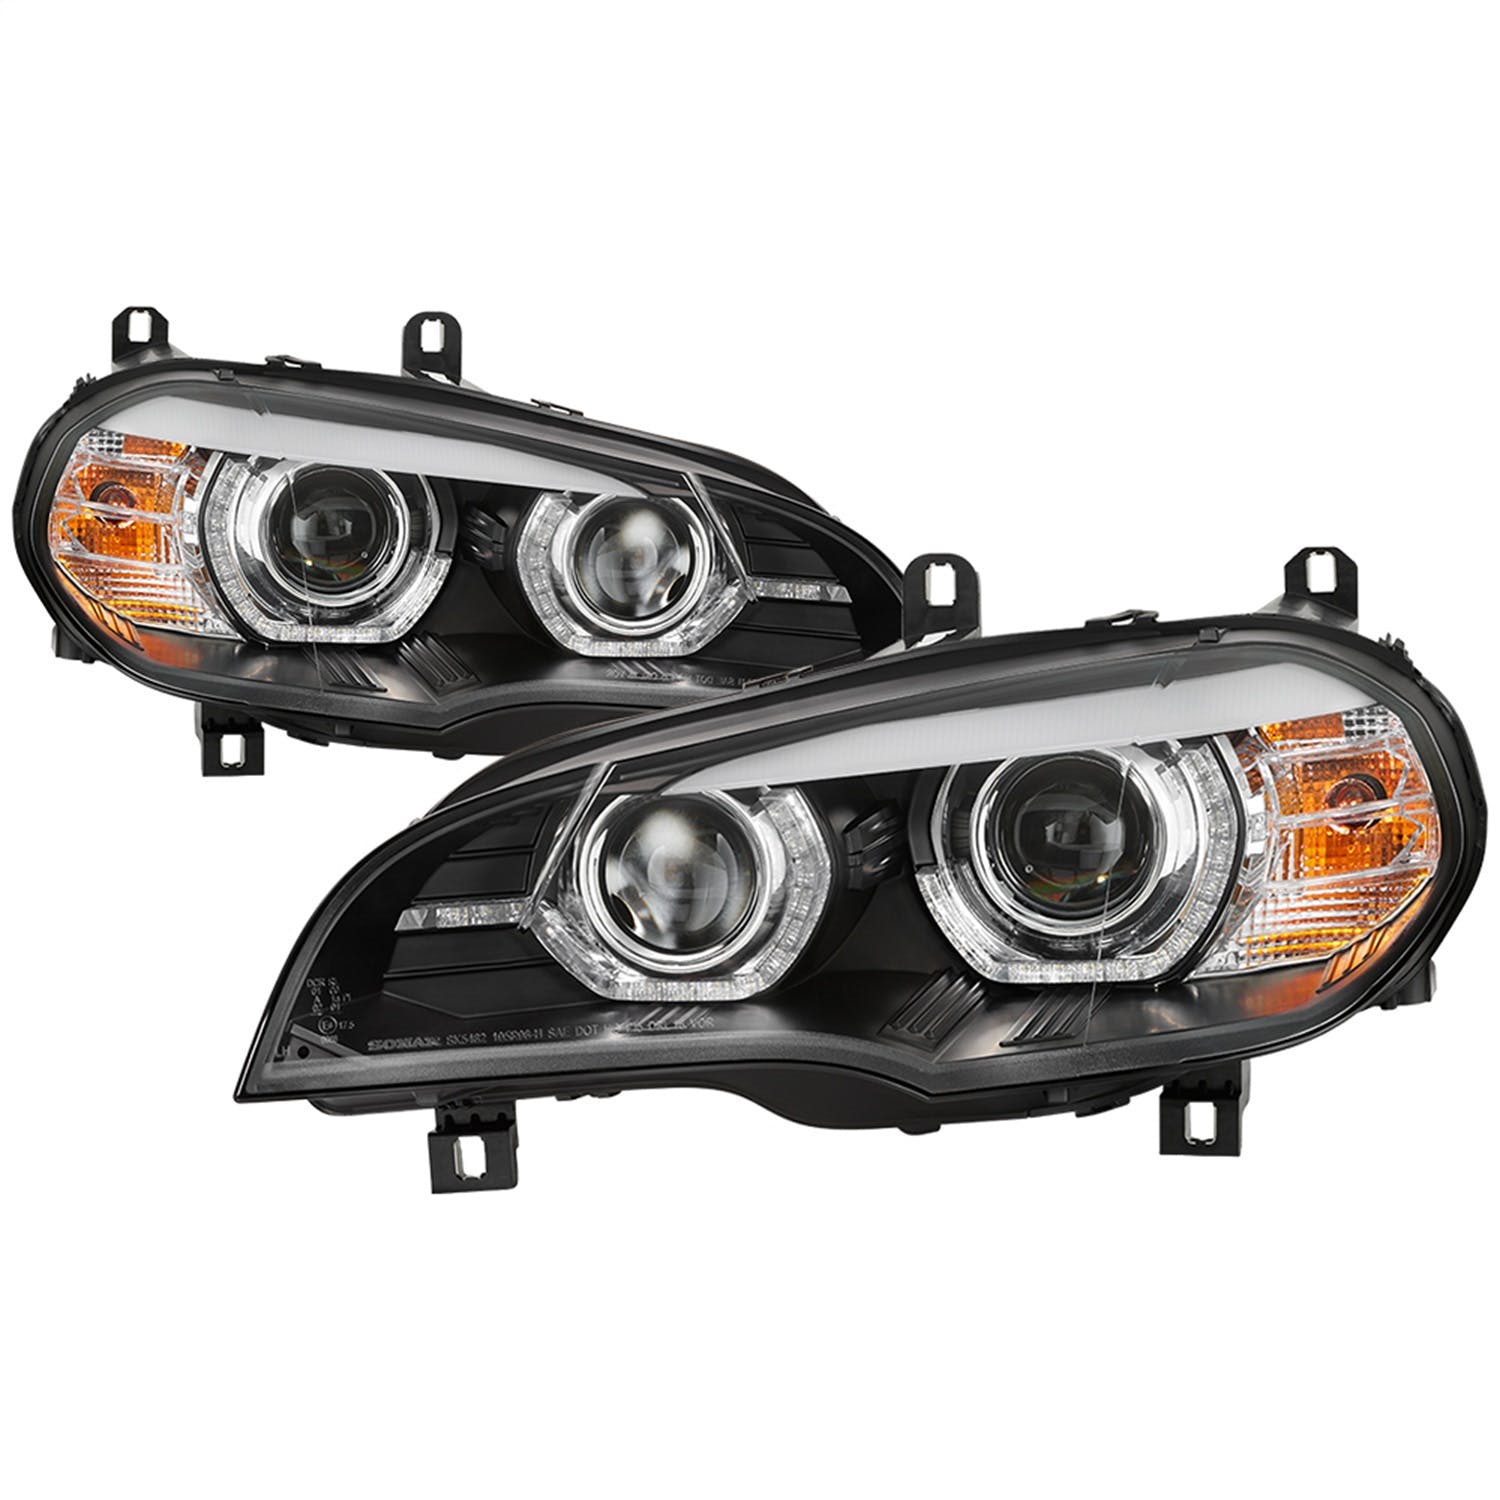 Spyder Auto 5085481 ( Spyder ) BMW X5 E70 2007-2010 AFS Model HID Model Only (Does Not Fit Halogen M